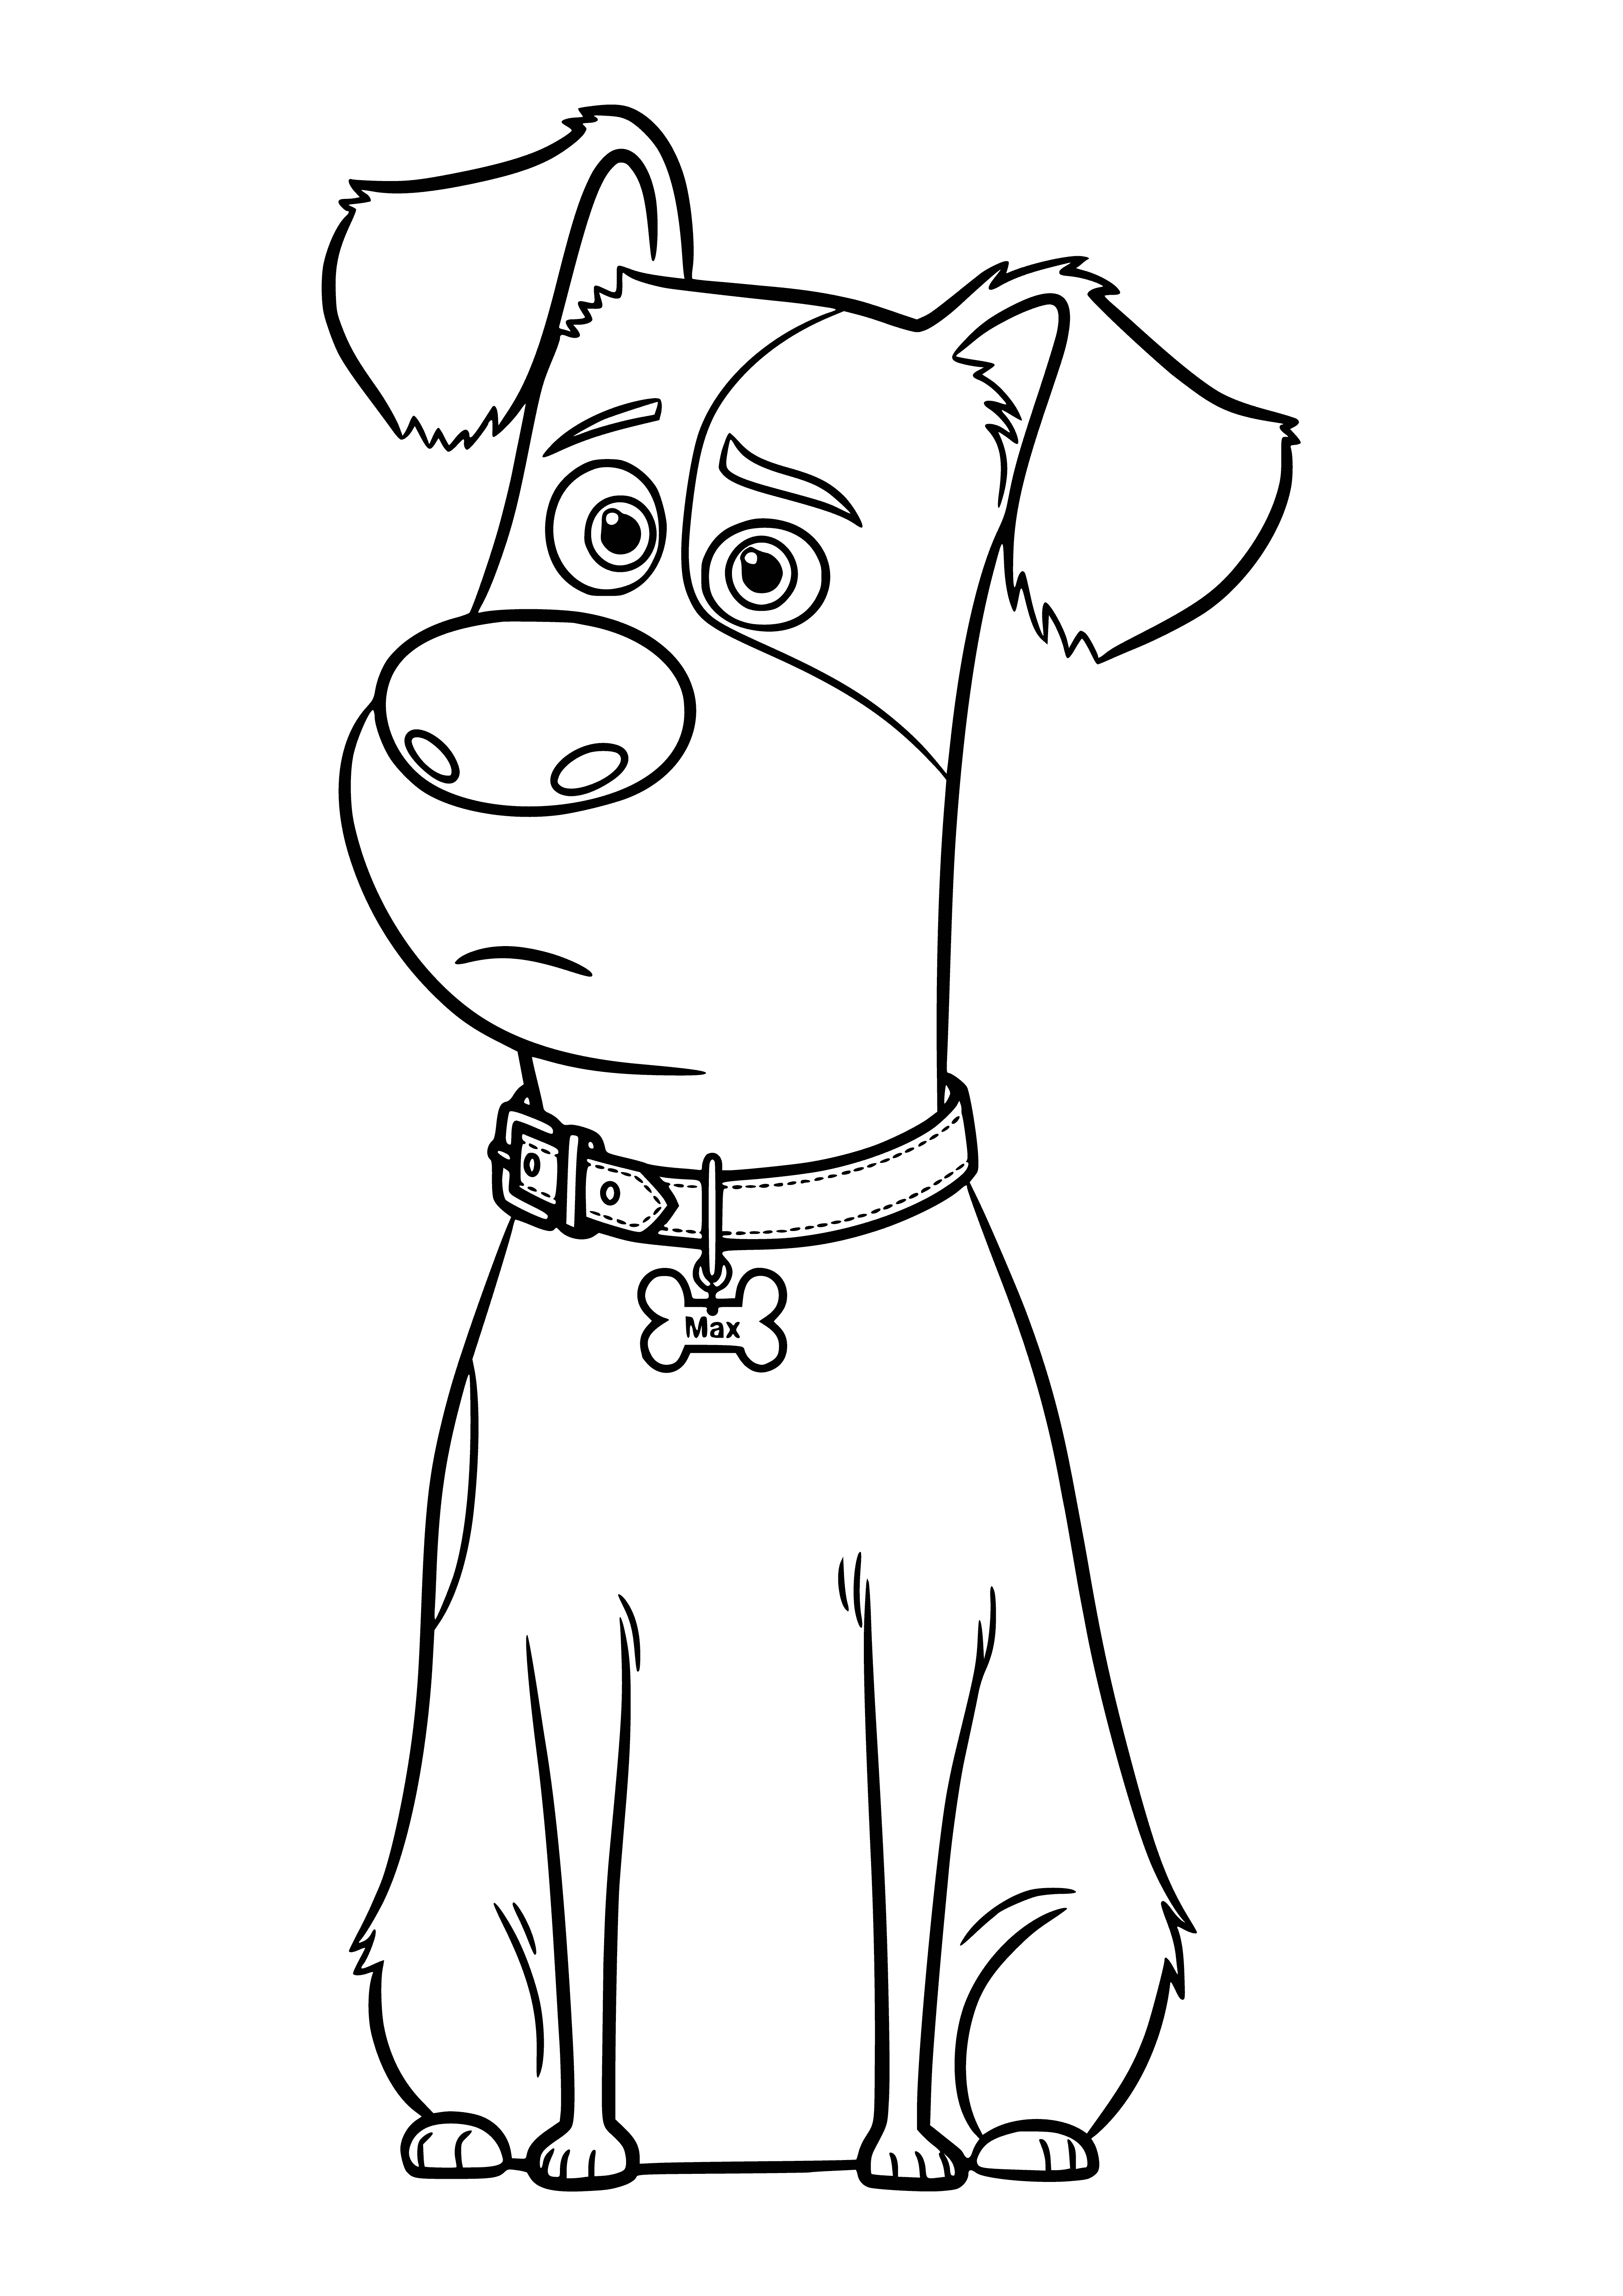 Terrier Max coloring page